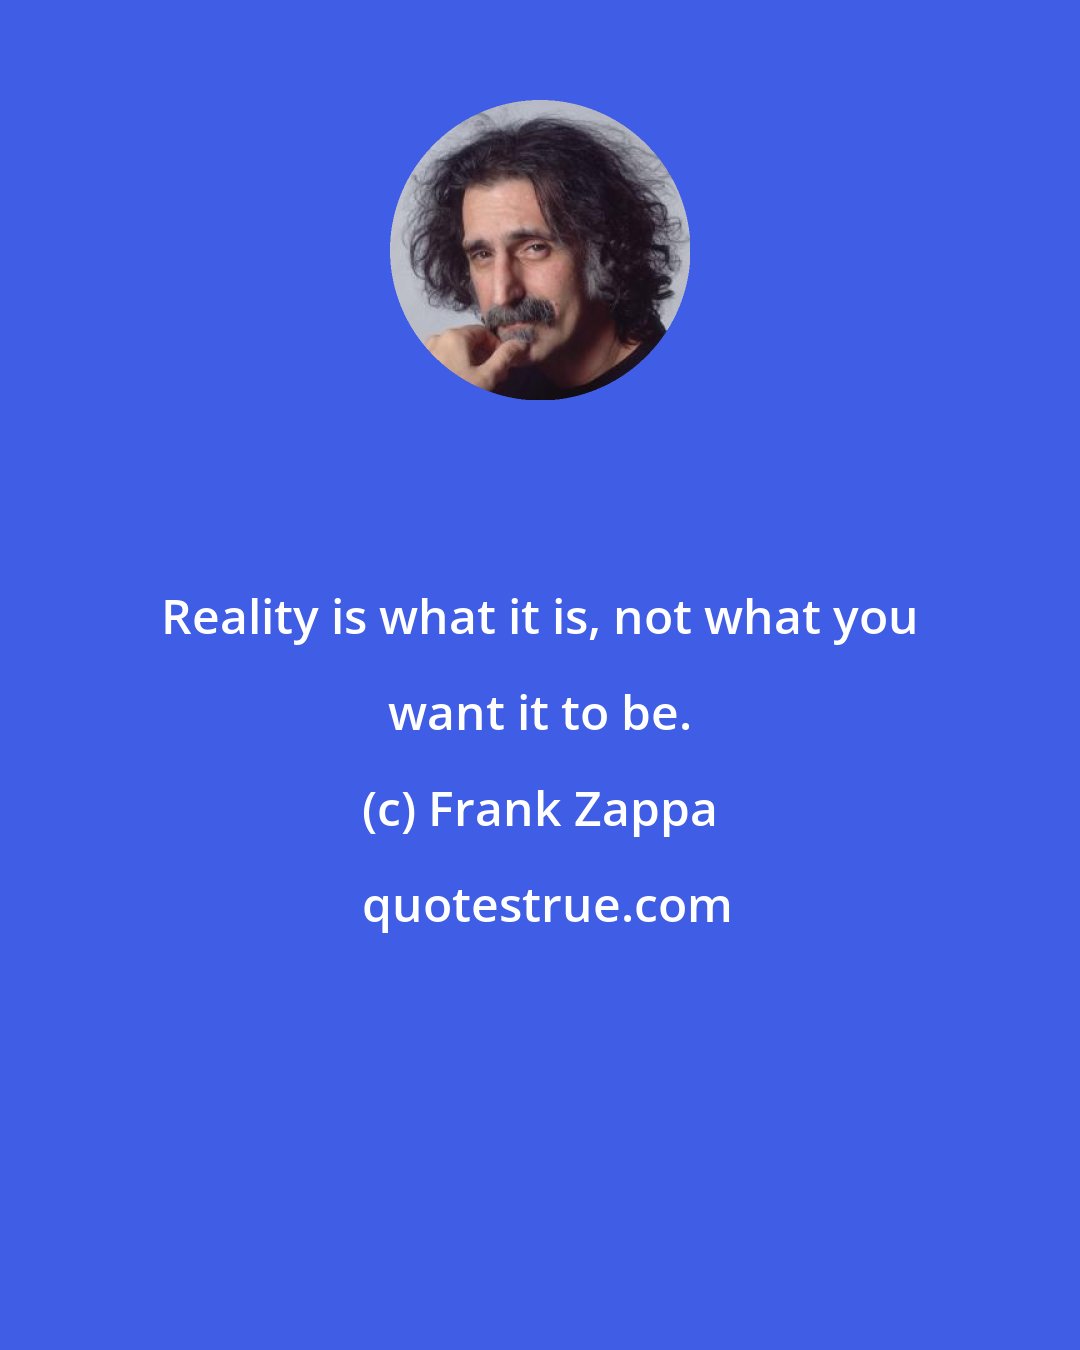 Frank Zappa: Reality is what it is, not what you want it to be.